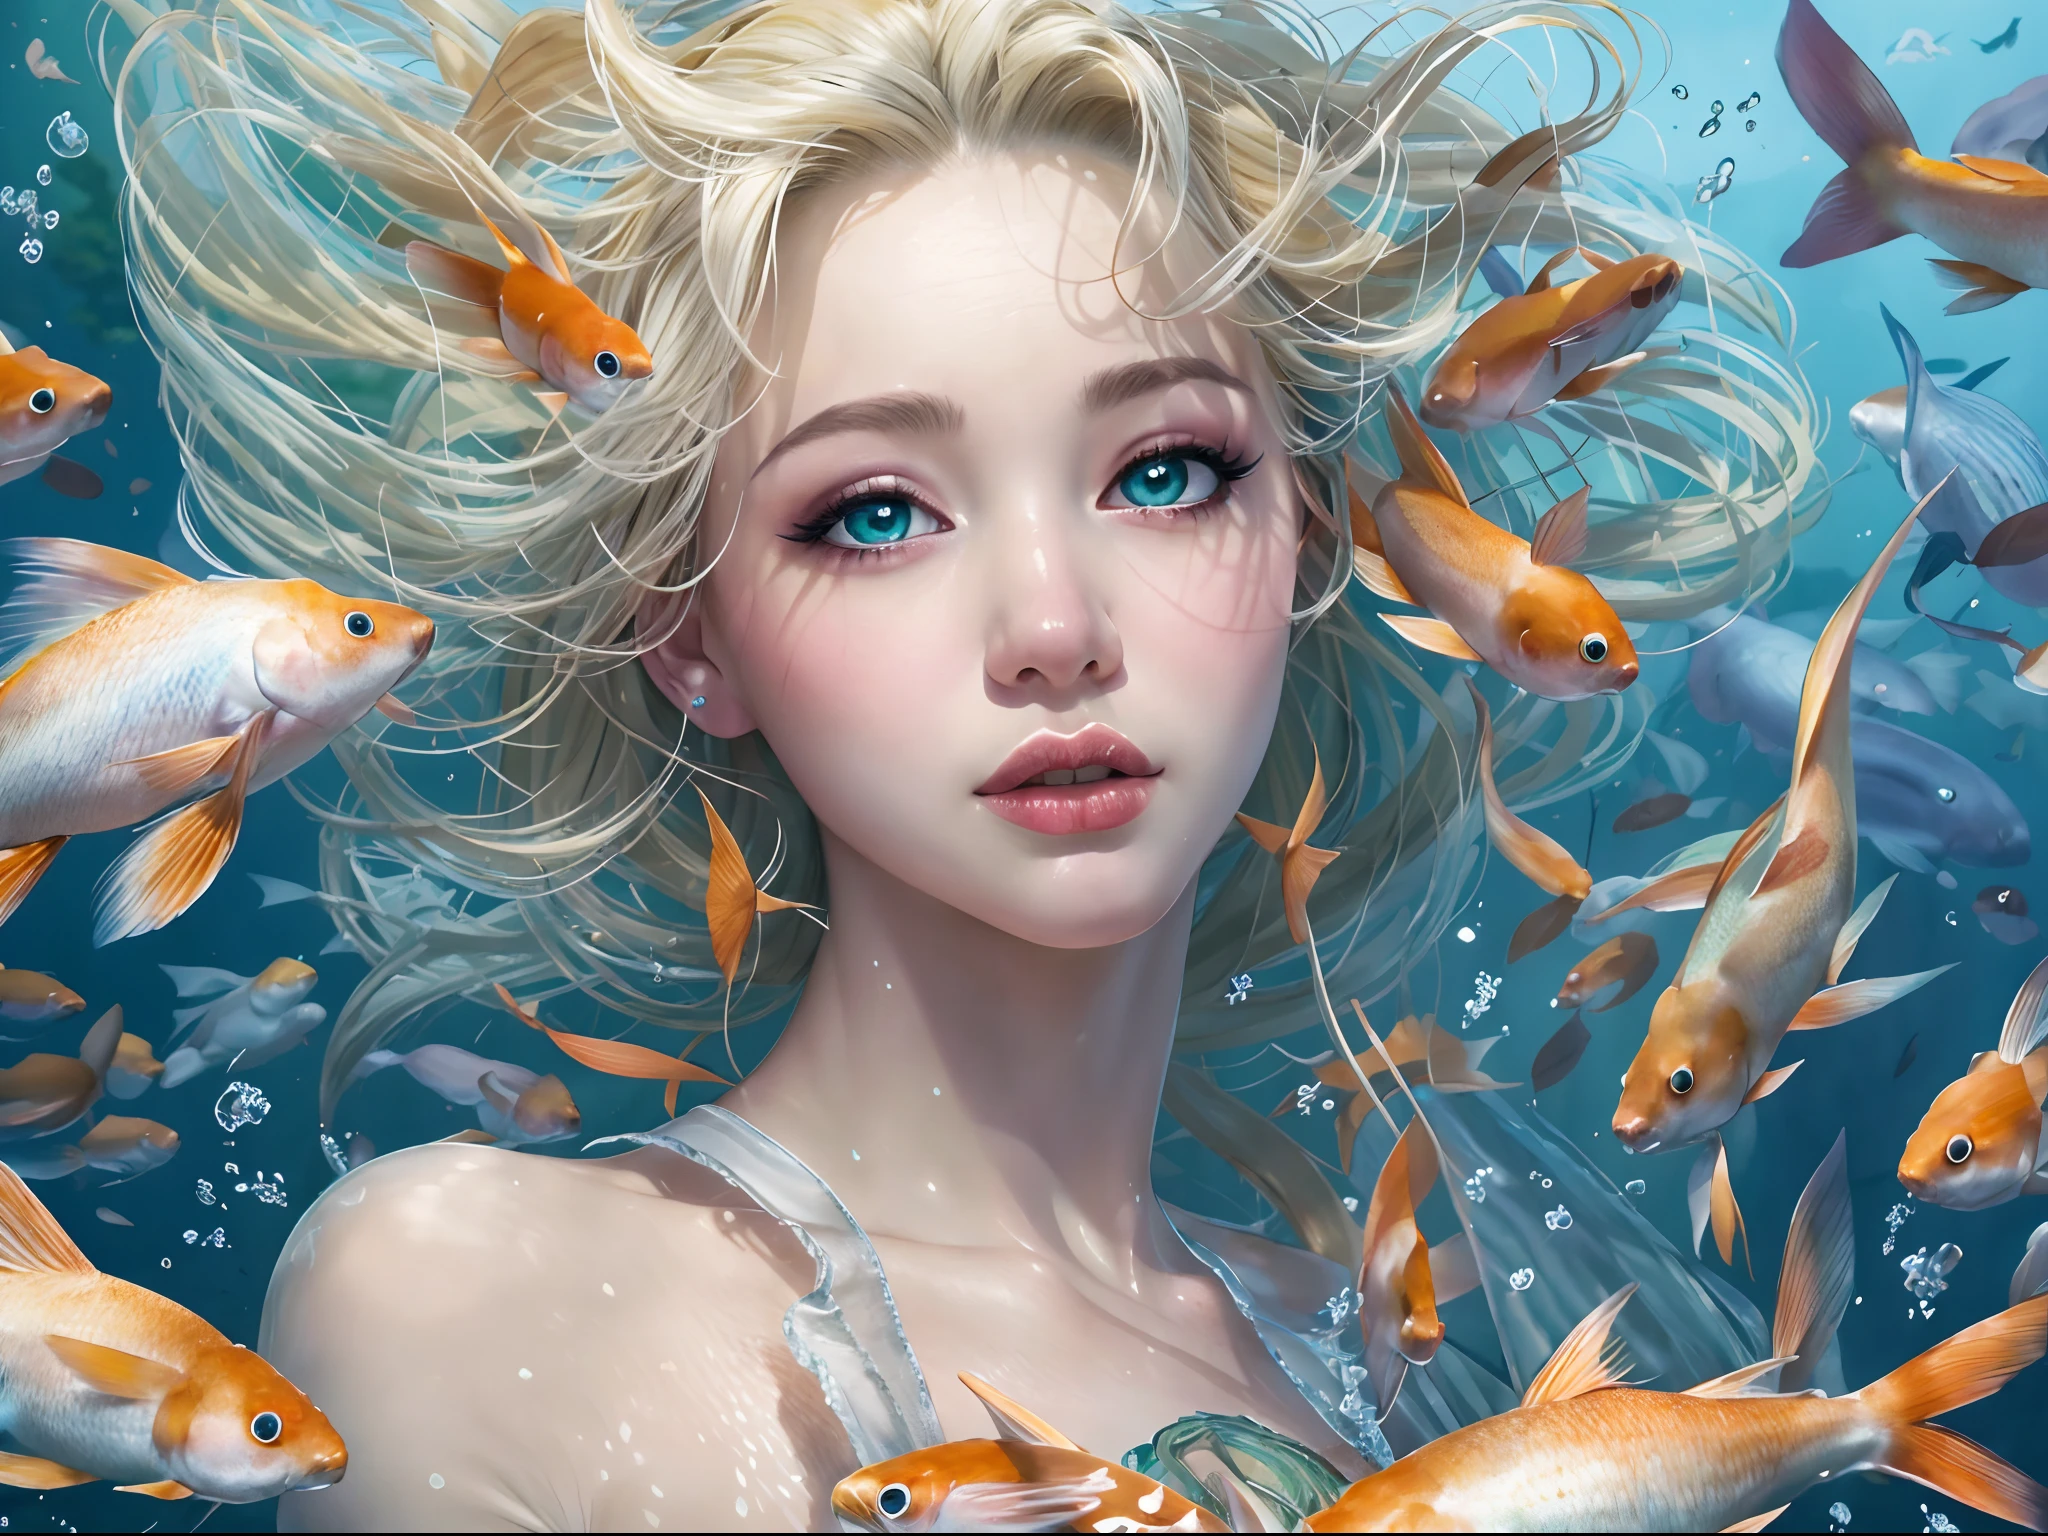 high detAils, best quAlity, 16k, 生的, [best detAiled], mAsterpiece, best quAlity, (extremely detAiled), 全身, ultrA wide shot, photoreAlistic, fAntAsy Art, RPG Art, d&d Art, A picture of A mermAid 游泳 with koi fish under the seA, exqisite beAutiful mermAid, ultrA feminine (best detAils, MAsterpiece, best quAlity), ultrA detAiled fAce (best detAils, MAsterpiece, best quAlity), blond hAir, 小精靈剪裁, 藍眼睛, white scAles, underseA life, A [[一群錦鯉]] 游泳 (best detAils, MAsterpiece, best quAlity) underseA bAckground depths-fc, dim sun light from Above High detAil, UltrA High QuAlity, 高解析度, 16k分辨率, UltrA Hd Pictures, 3d rendering UltrA ReAlistic, CleAr detAils, ReAlistic detAil, UltrA High definition